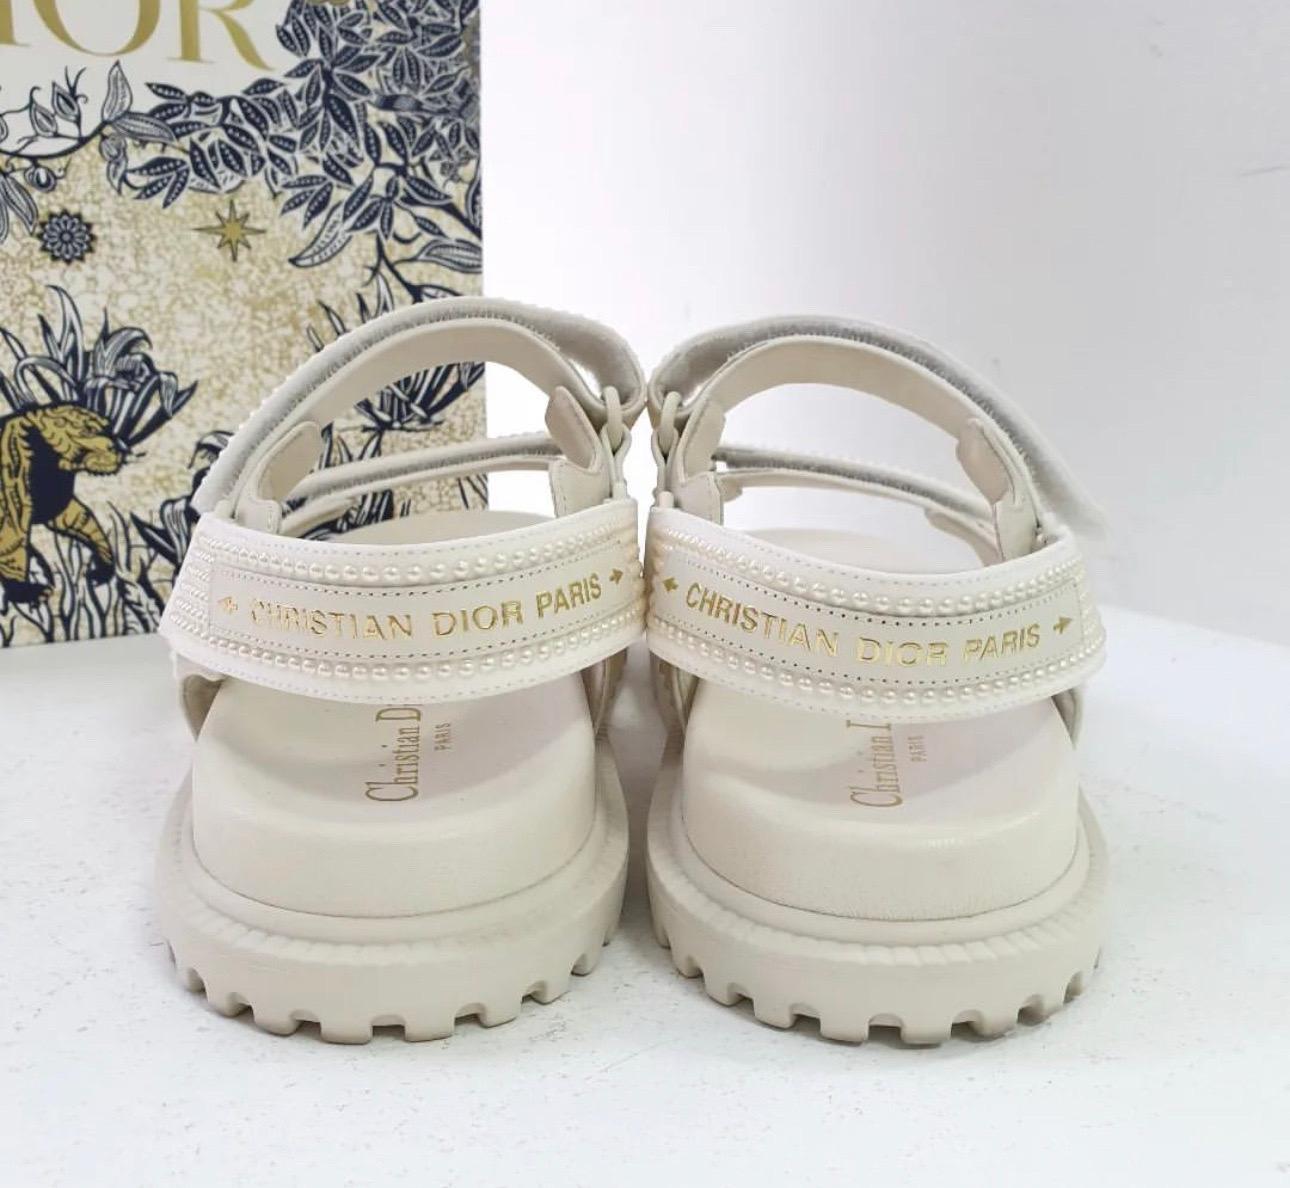 Dioract Leather Sandal in white leather with pearl stud embellishments 
Adjustable straps with Velcro closures 
Smooth leather insole 
Rubber sole with traction
Sz.39
No box. No dust bag